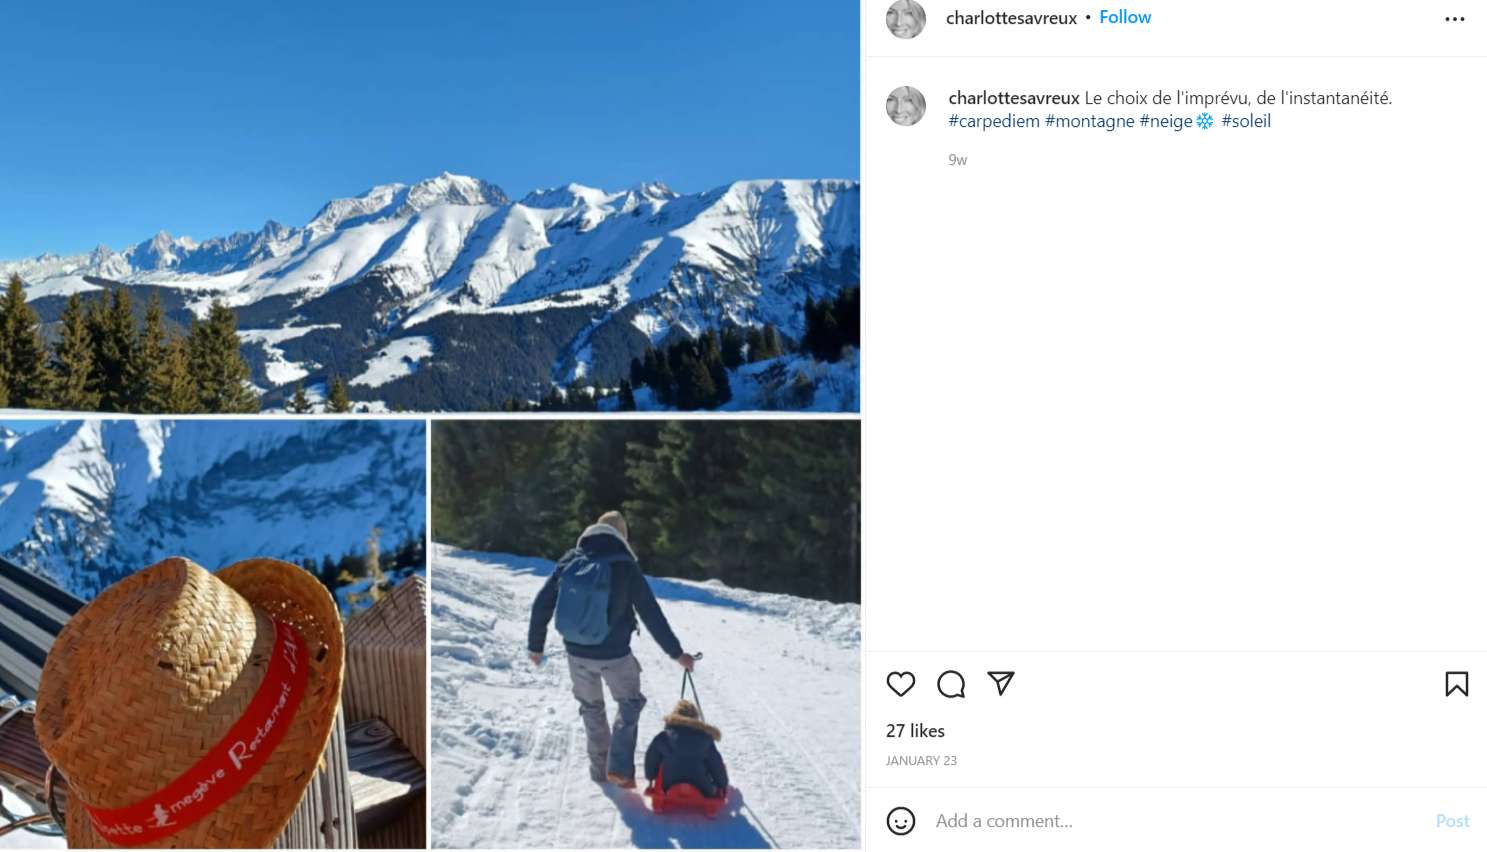 Charlotte Savreux posted on Instagram about her adventurous journey